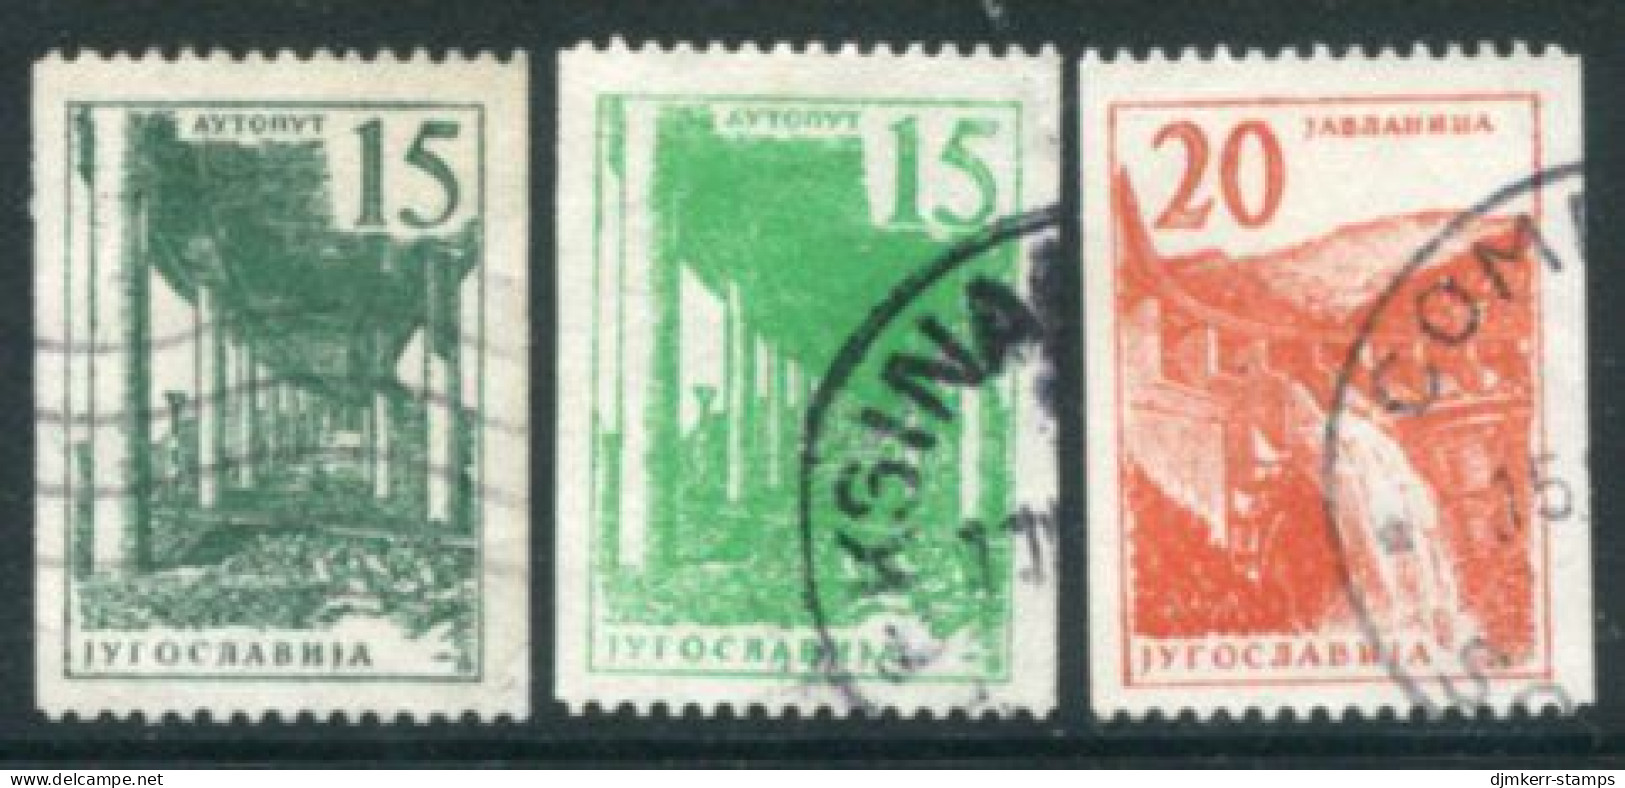 YUGOSLAVIA 1959 Definitive Coil Stamps  Used.  Michel 898a,b-899 - Usados